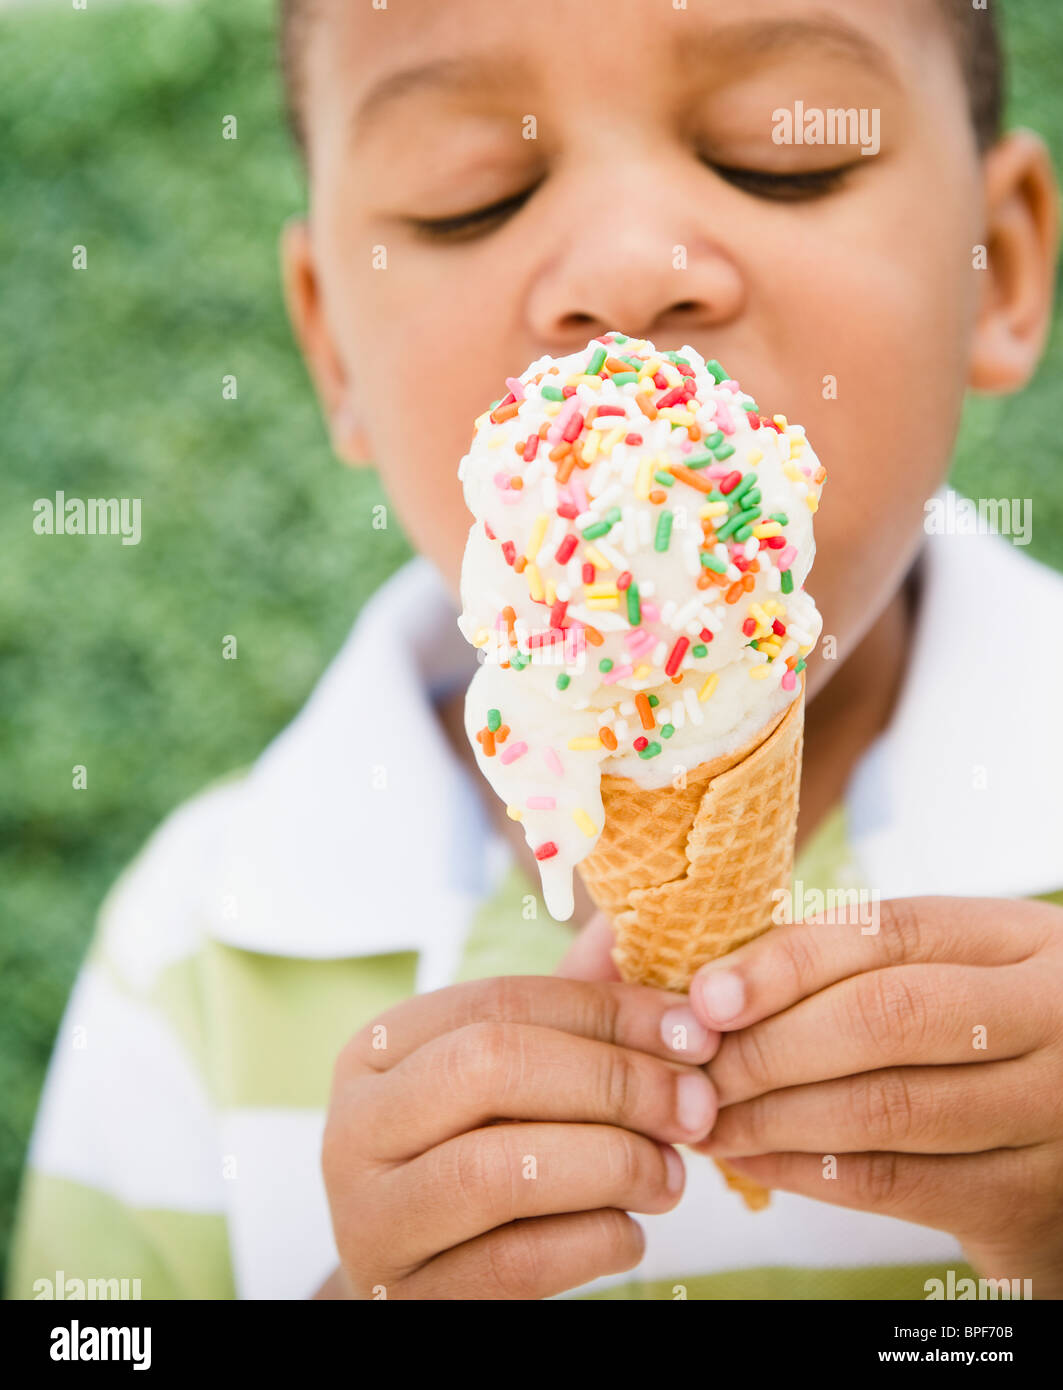 African American boy eating ice cream cone Banque D'Images